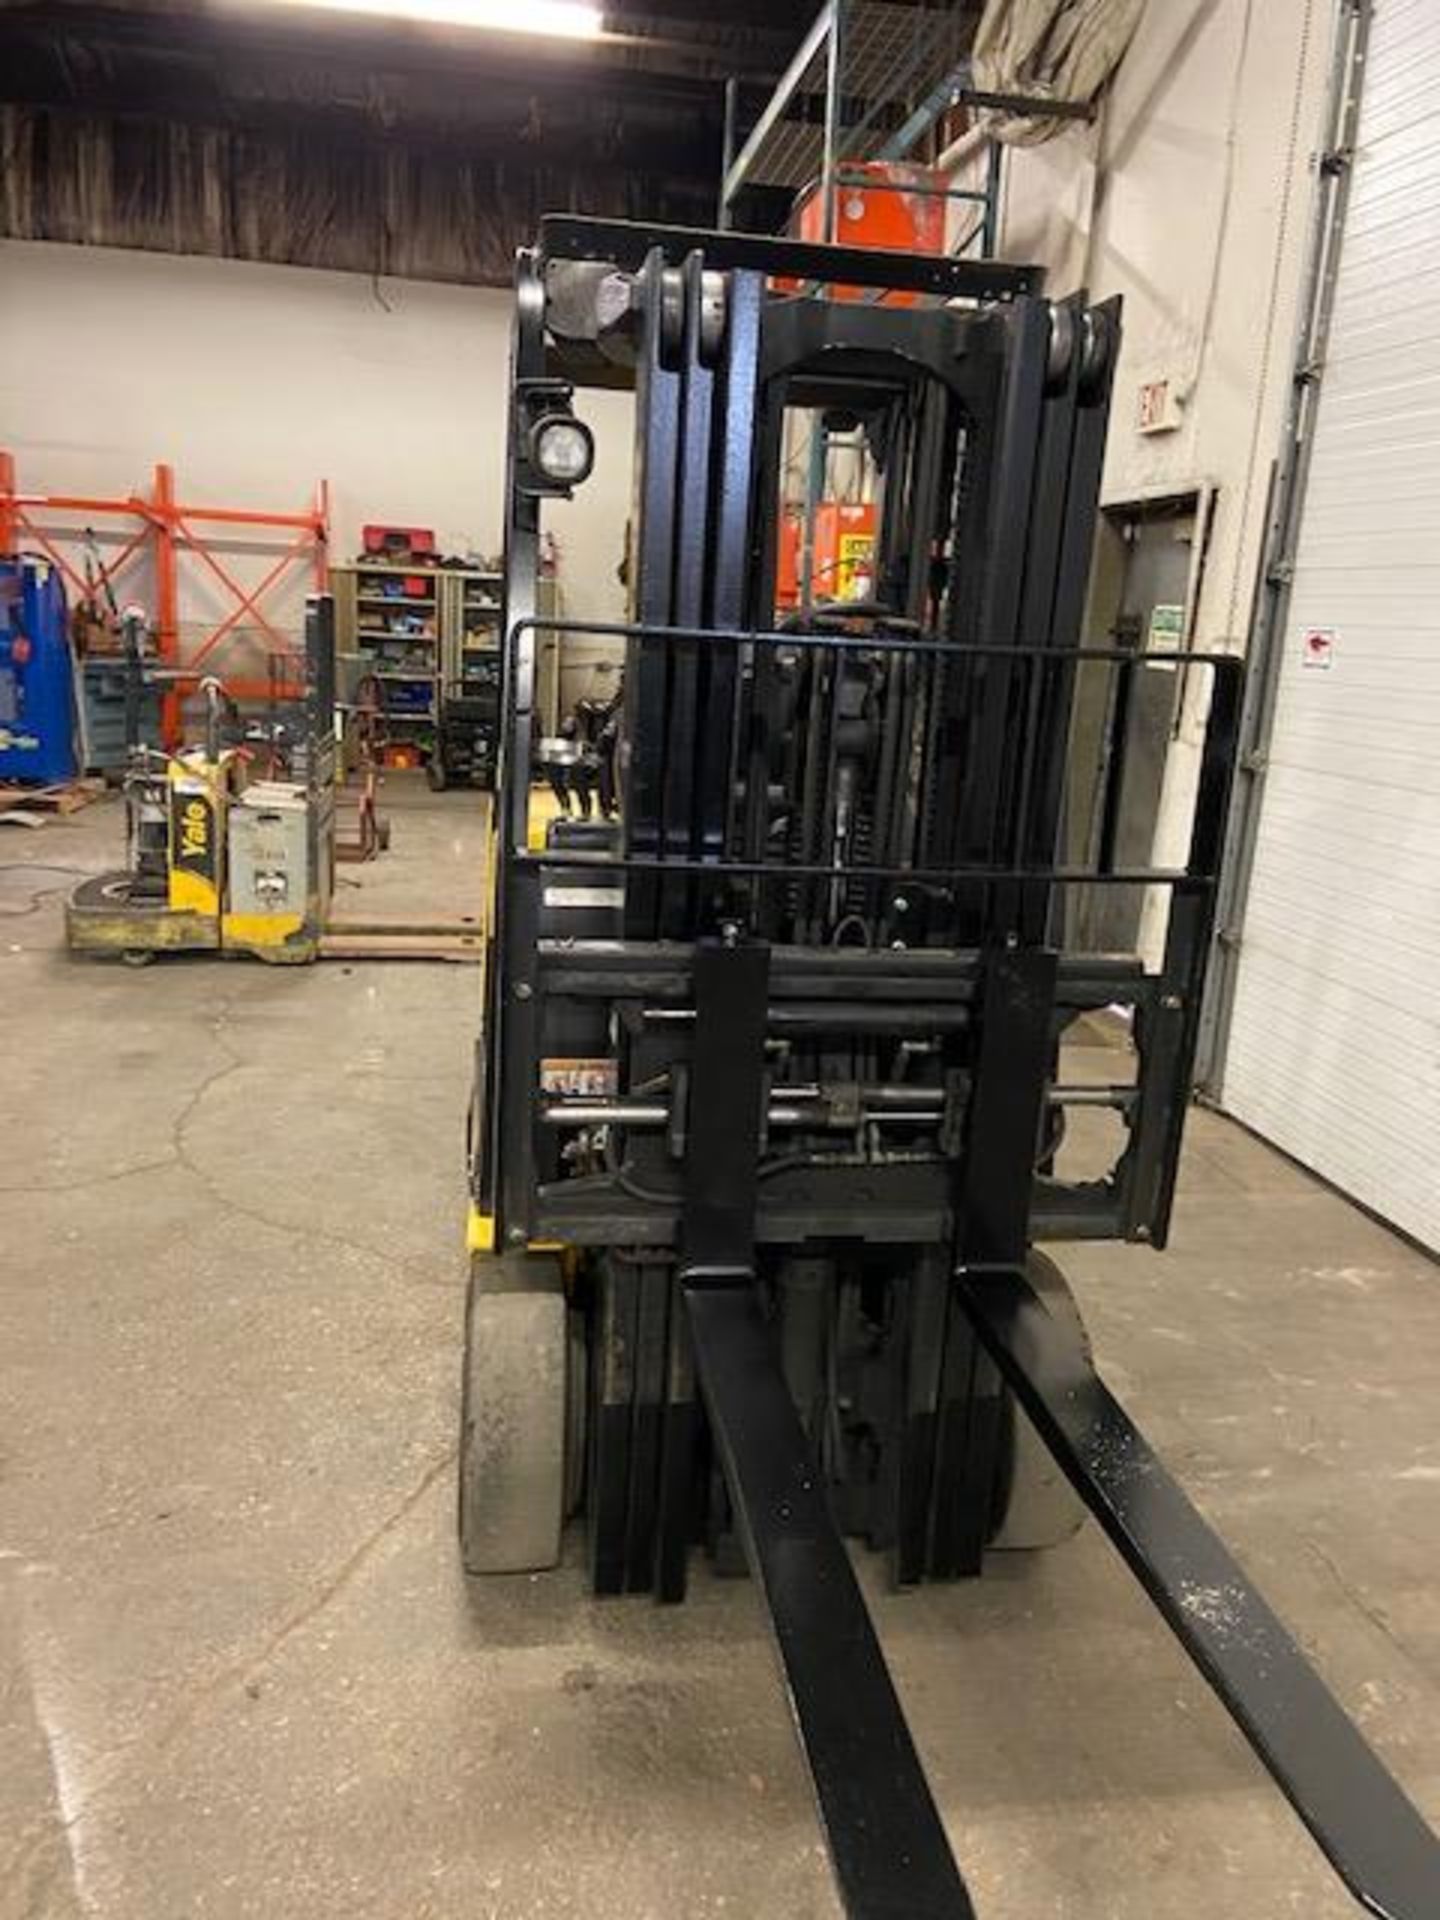 FREE CUSTOMS - 2012 Yale 5000lbs Capacity Forklift with 3-stage mast - electric with sideshift - Image 2 of 2